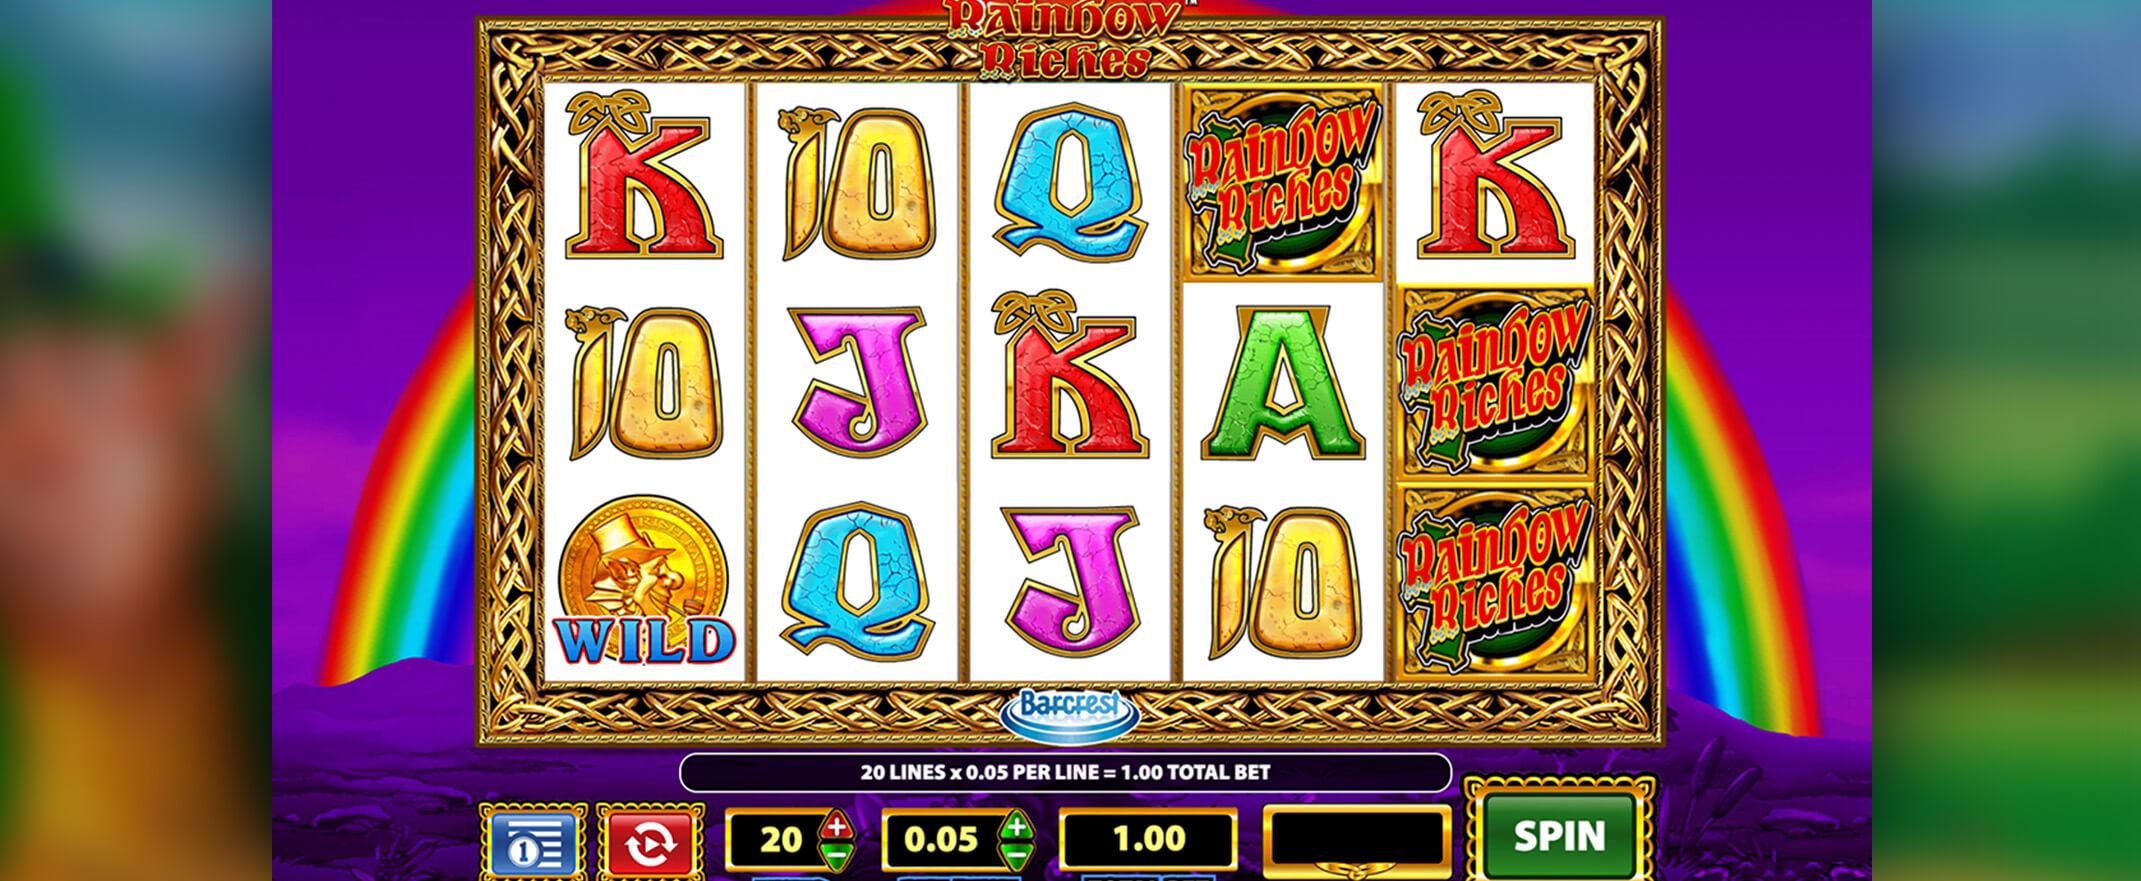 Rainbow Riches slot from Barcrest